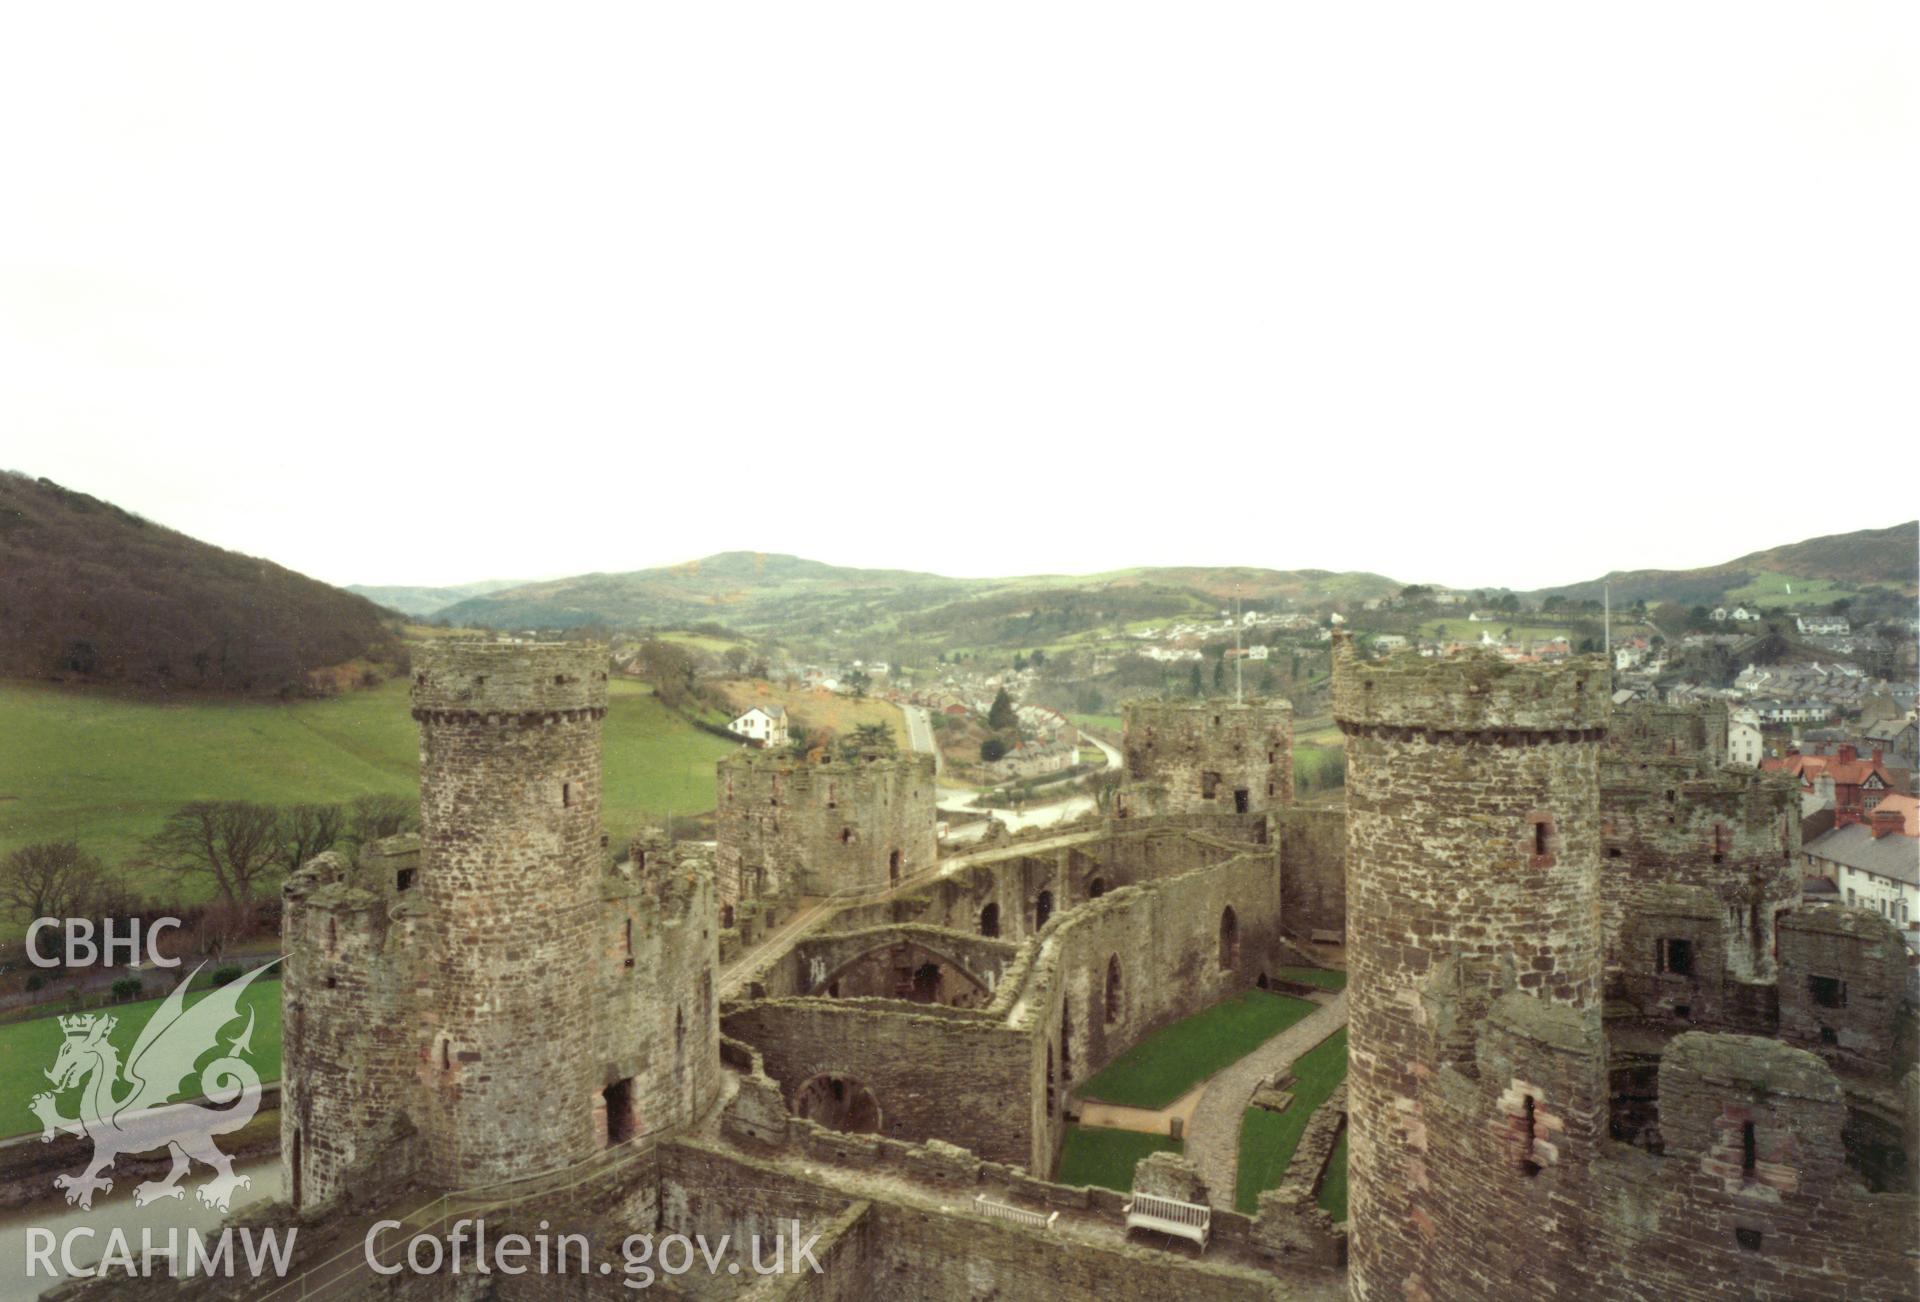 1 of a set of 27 colour prints: print showing view of Conwy castle, collated by the former Central Office of Information.